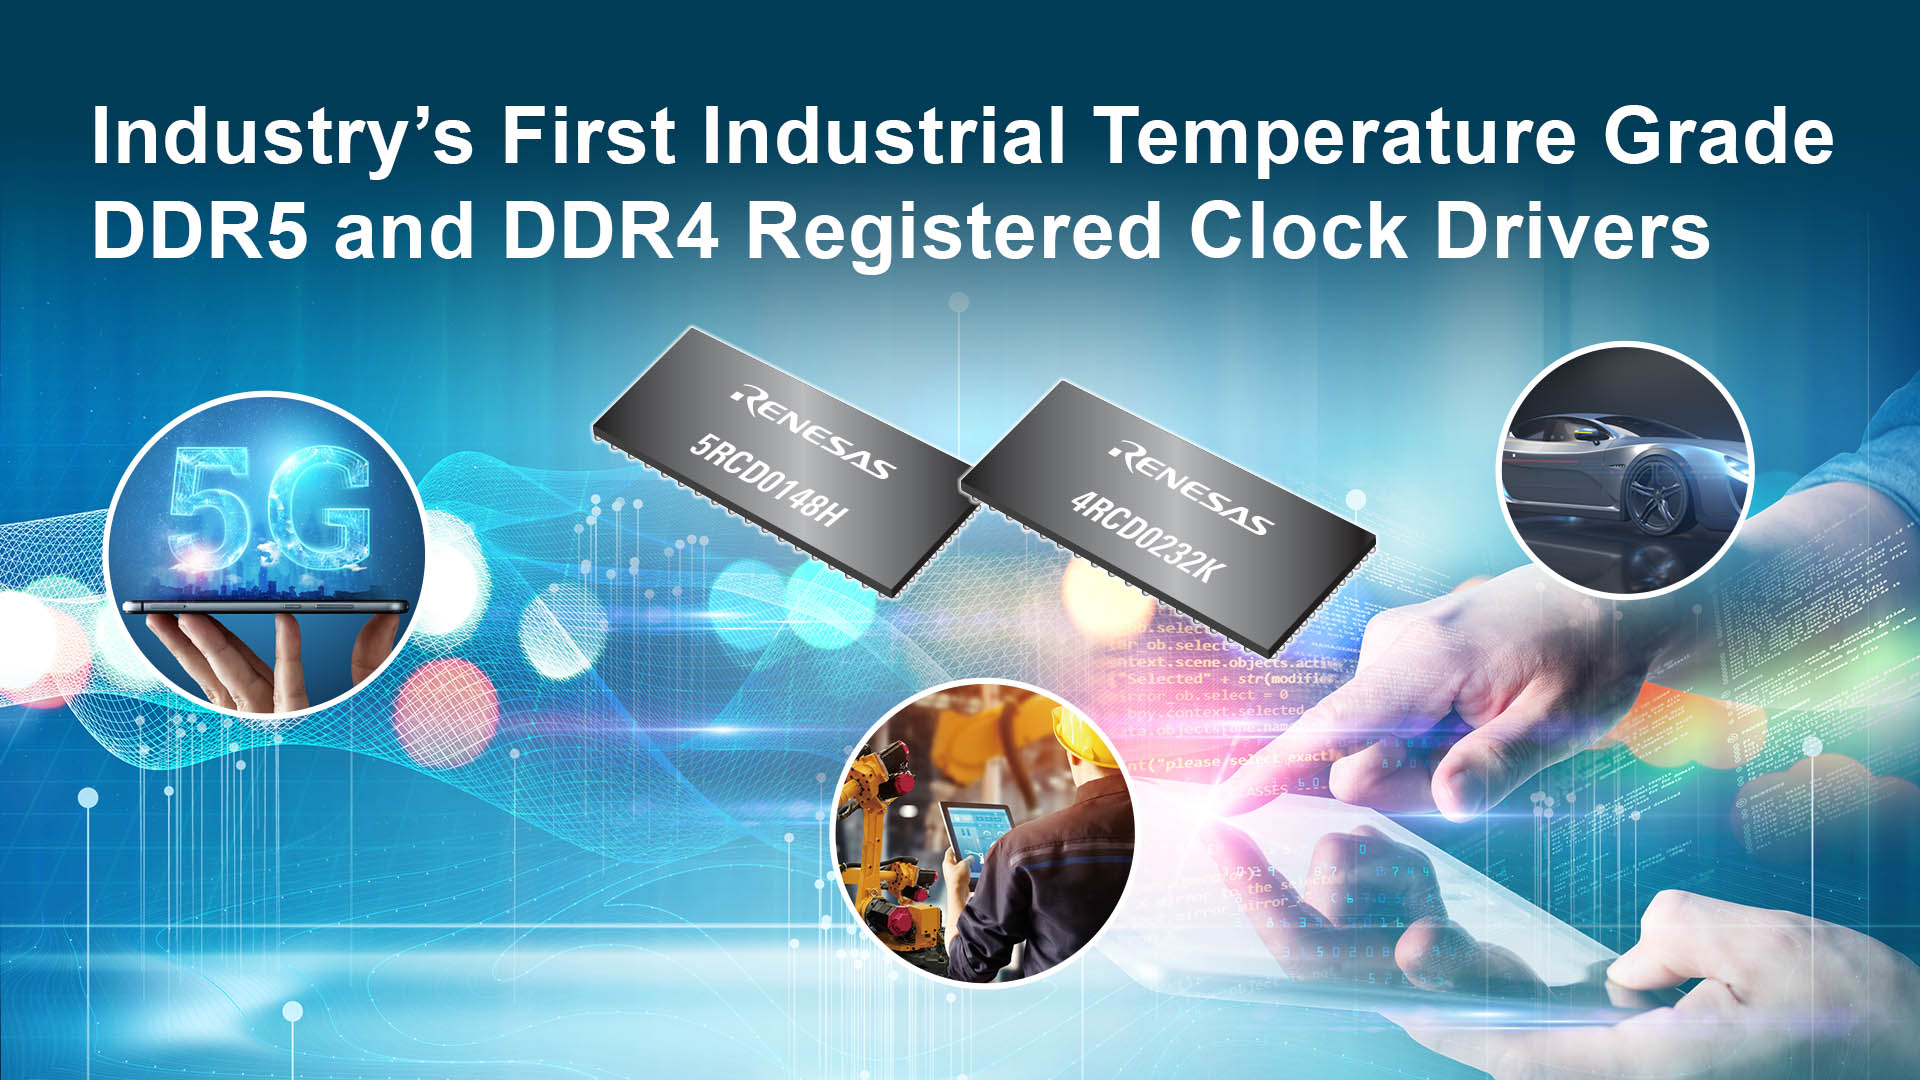 First Industrial Temperature Grade DDR5, DDR4 Registered Clock Drivers